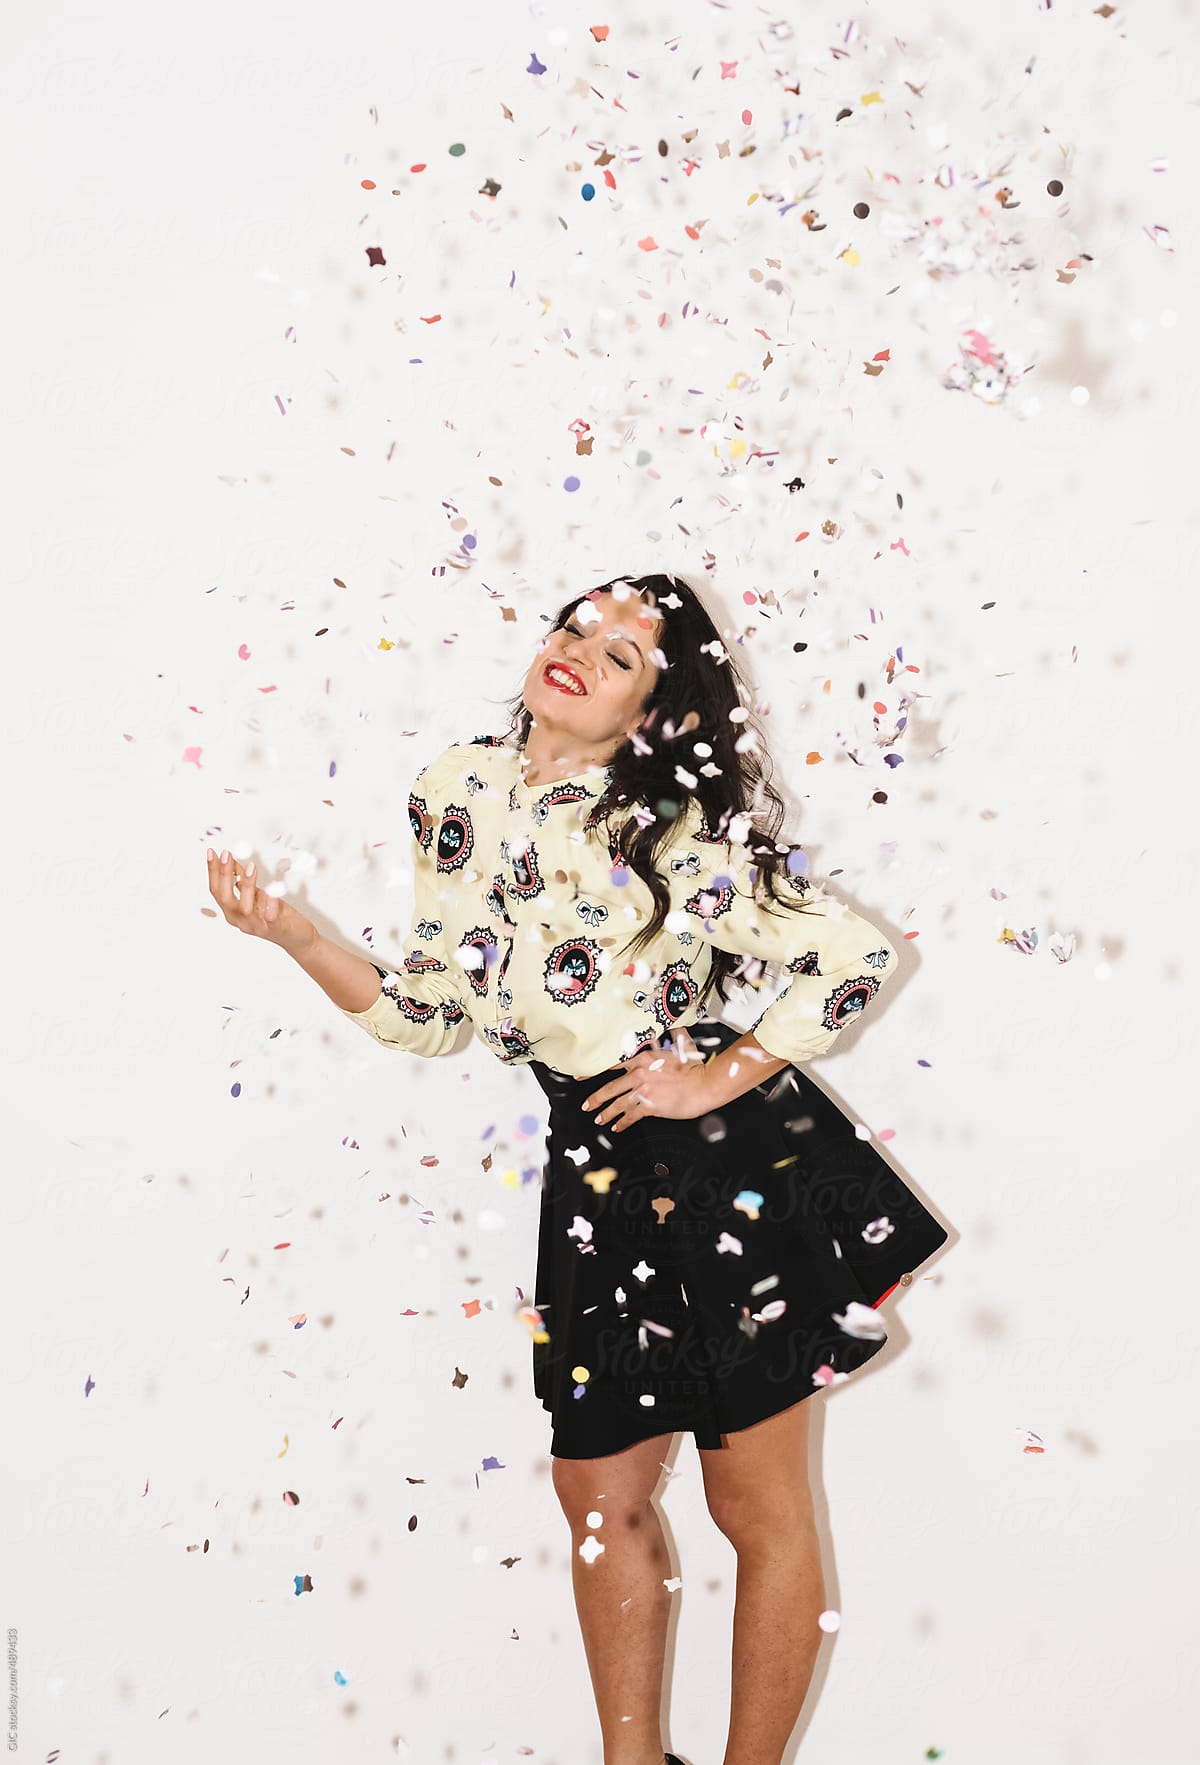 Woman enjoying the party with confetti in air